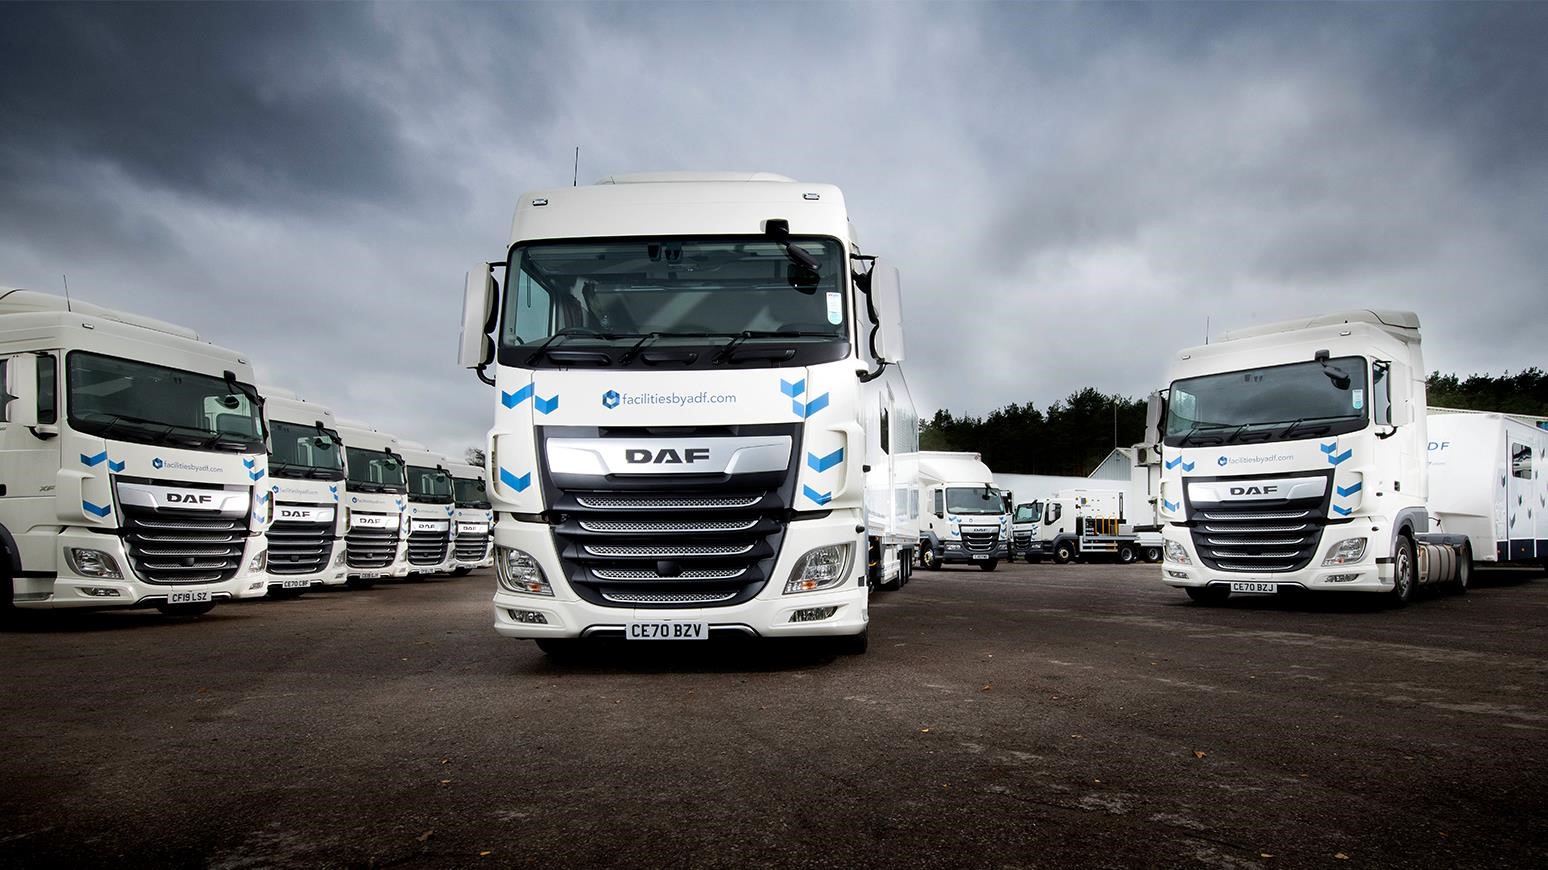 TV & Film Industry Support Vehicle Specialist Facilities By ADF Adds 25 Trucks To All-DAF Fleet